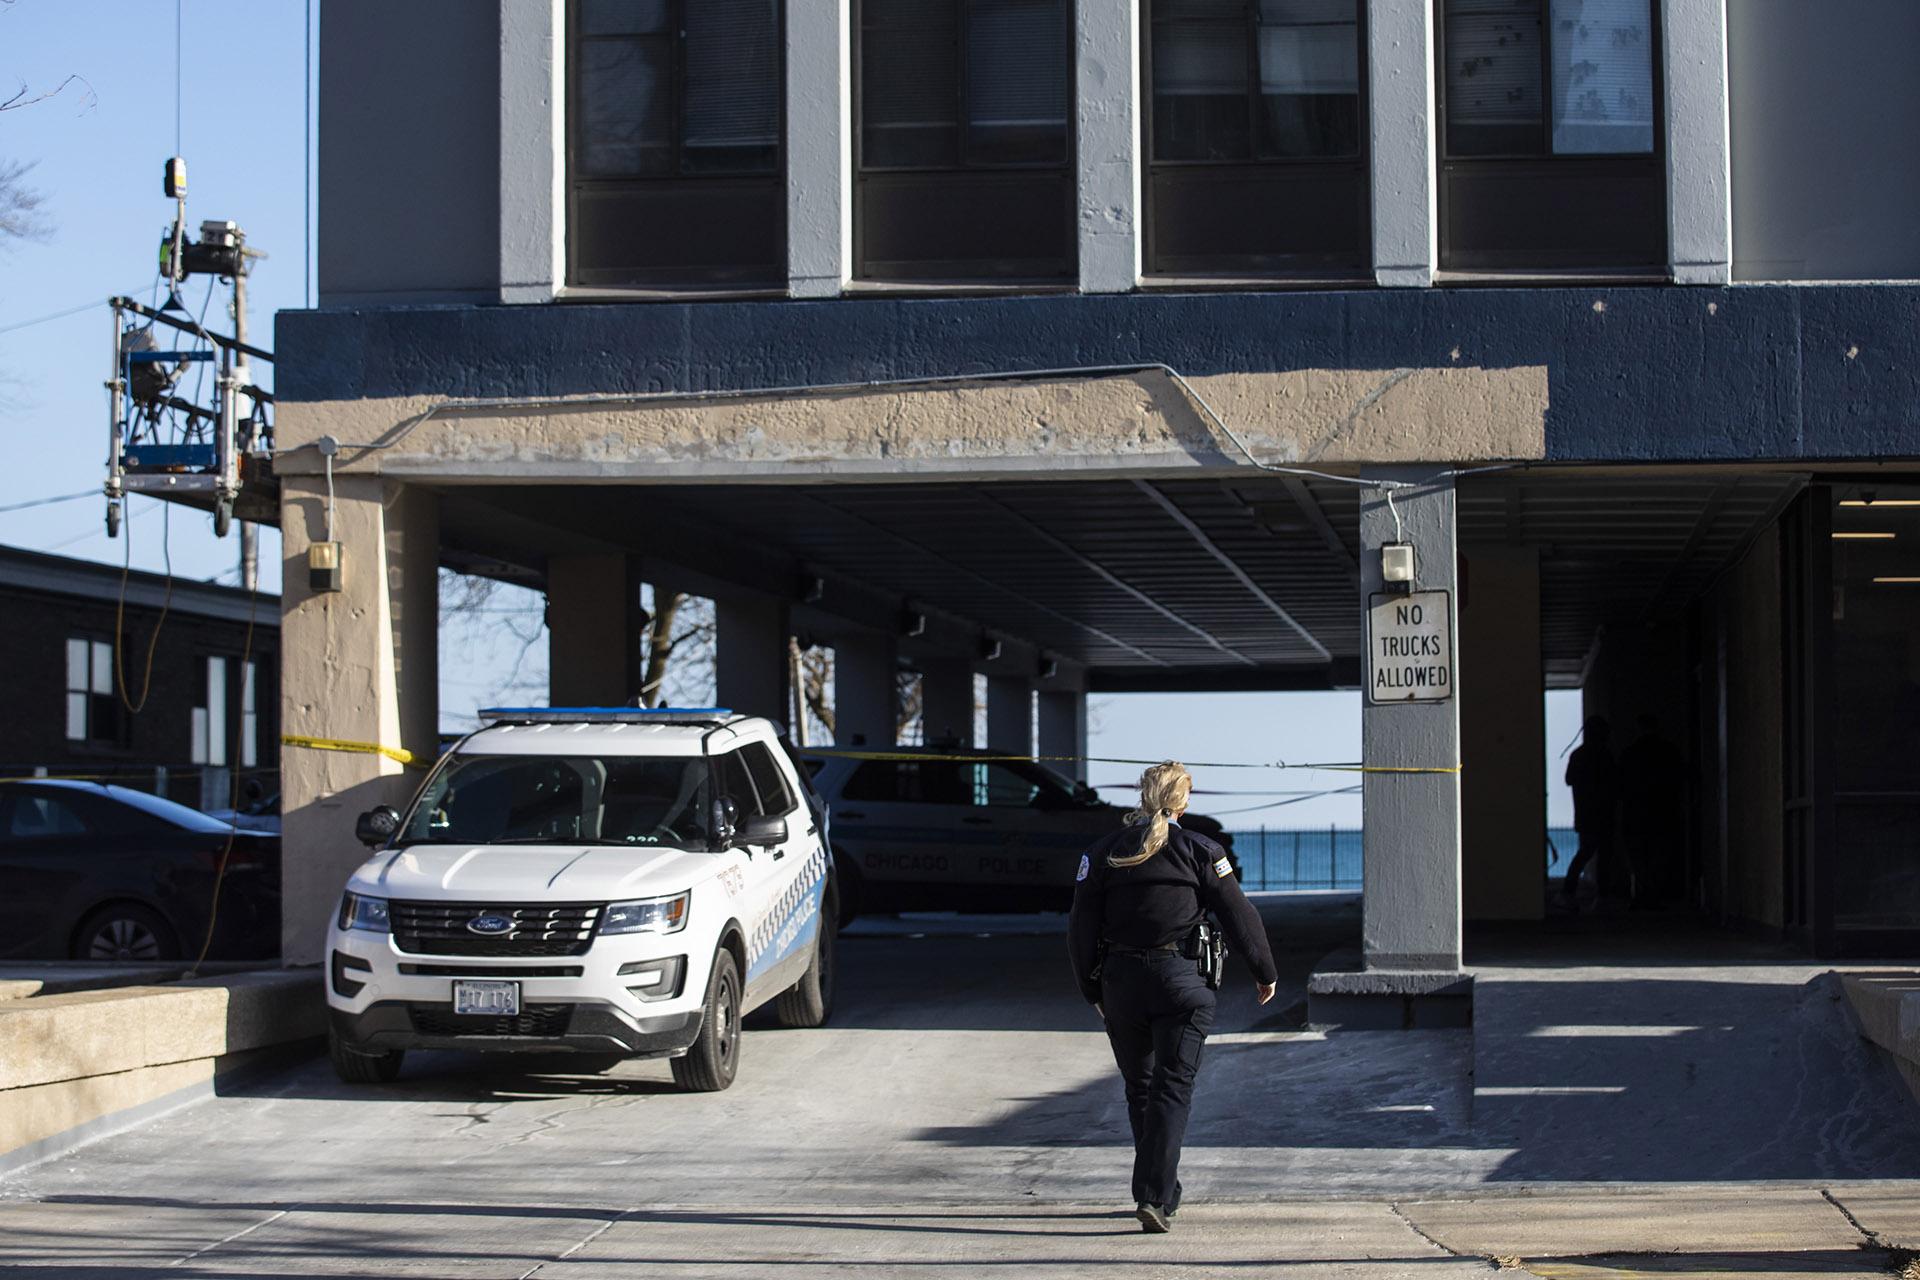 Chicago Police investigate at a South Shore neighborhood high-rise apartment building in the 7200 block of South South Shore Drive, Thursday morning, Jan. 2, 2020. (Ashlee Rezin Garcia / Chicago Sun-Times via AP)